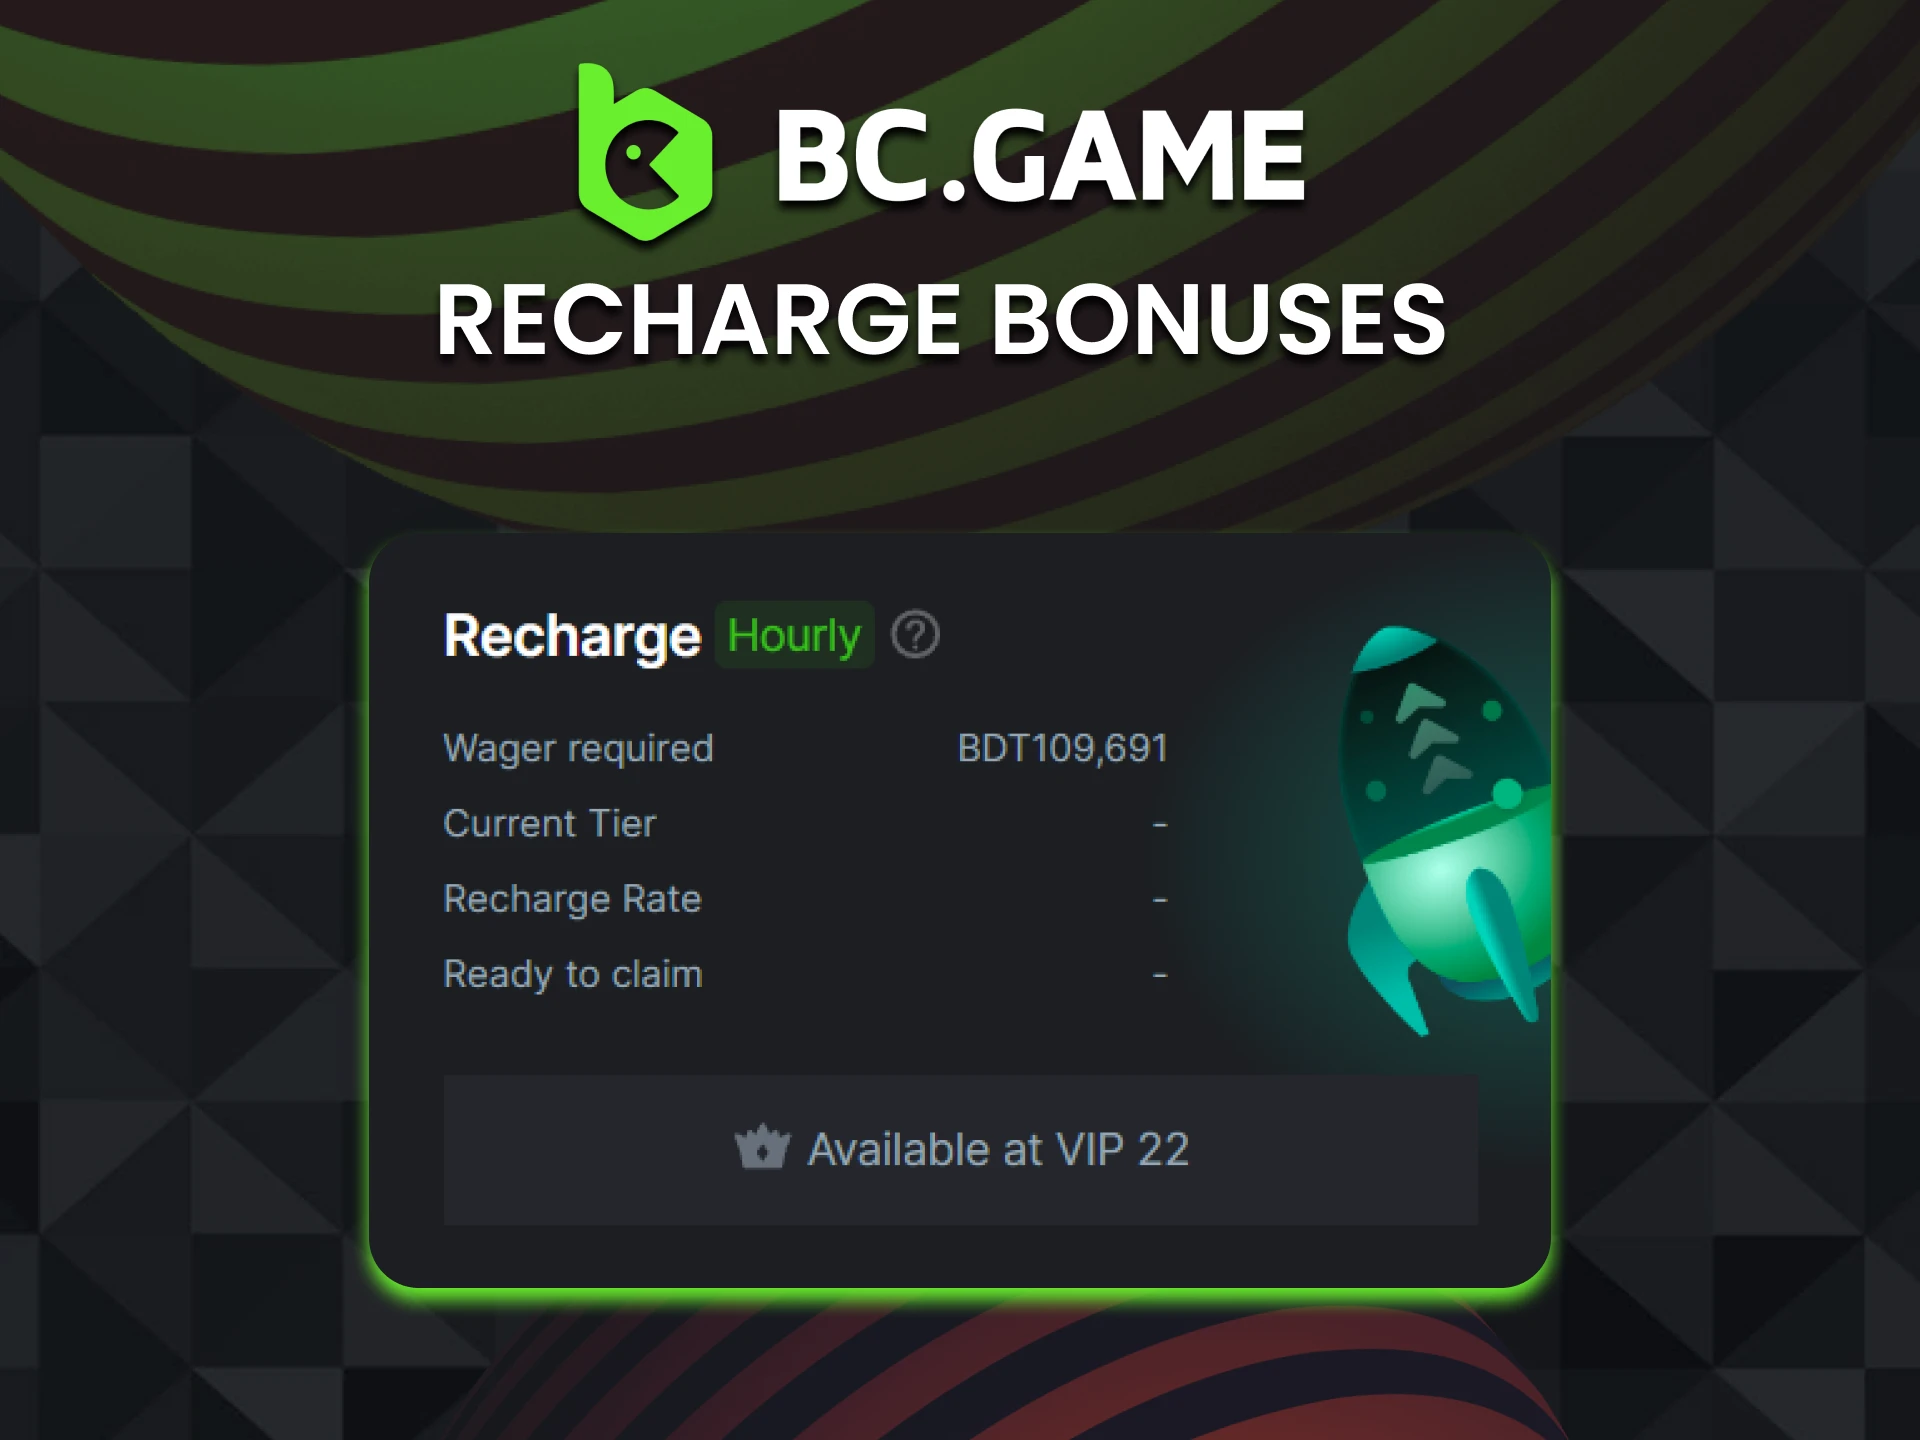 Get a special BC Game weekly recharge bonus.